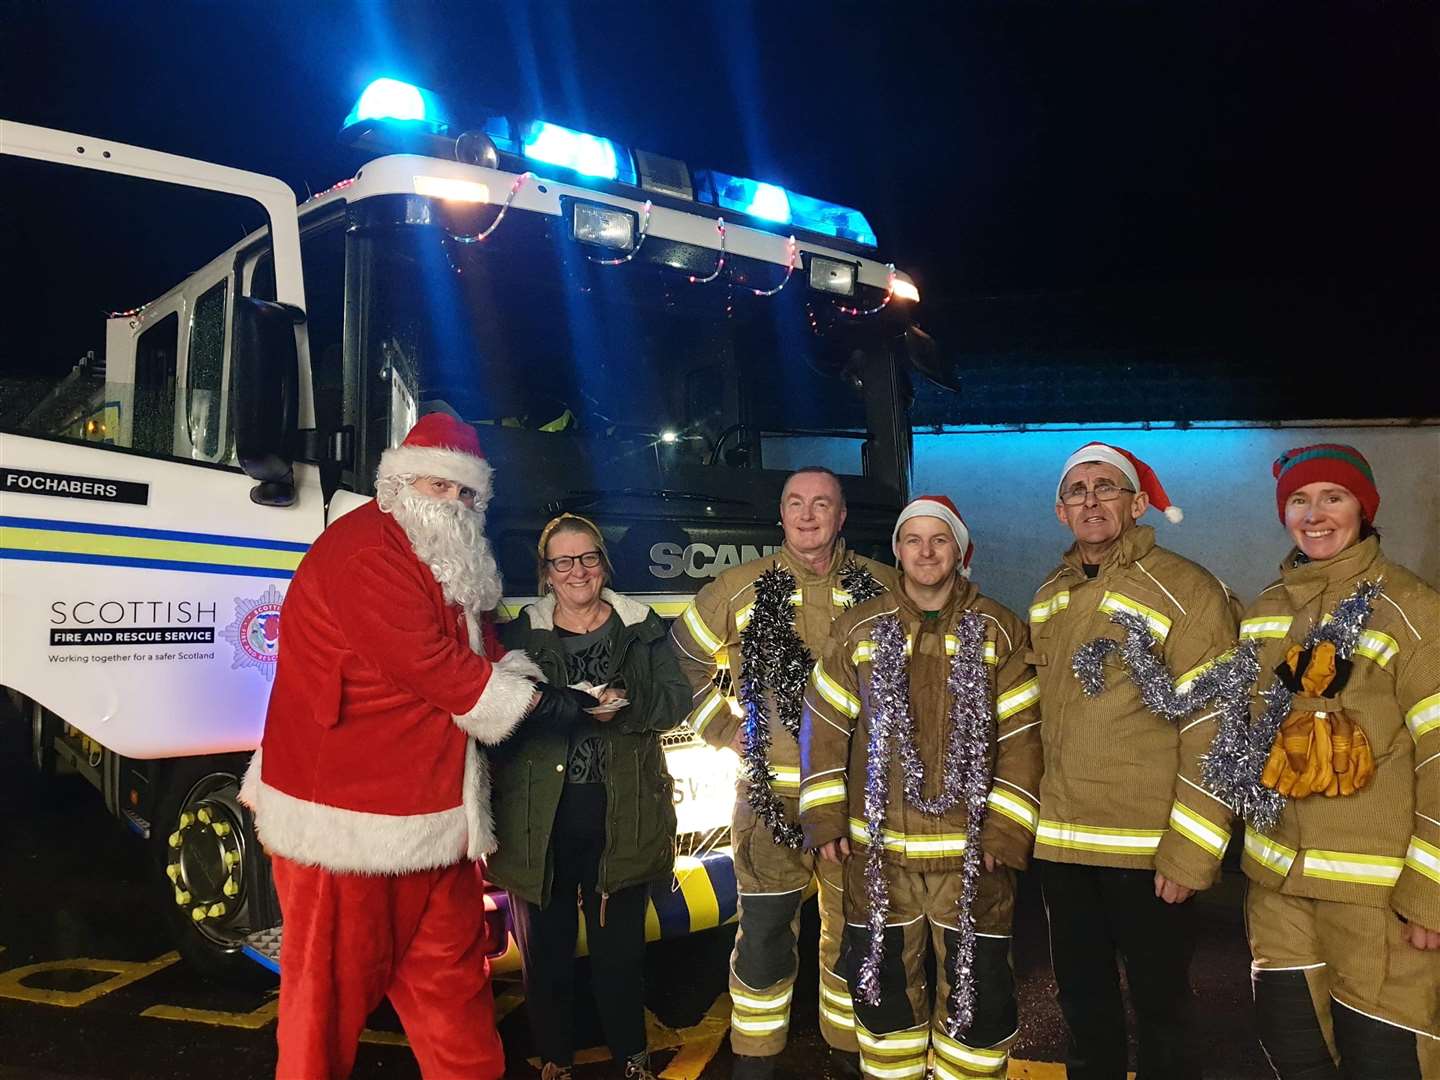 Santa accepts a donation from a householder as some of the fund-raising firefightrs look on. Picture: Fochabers fire station